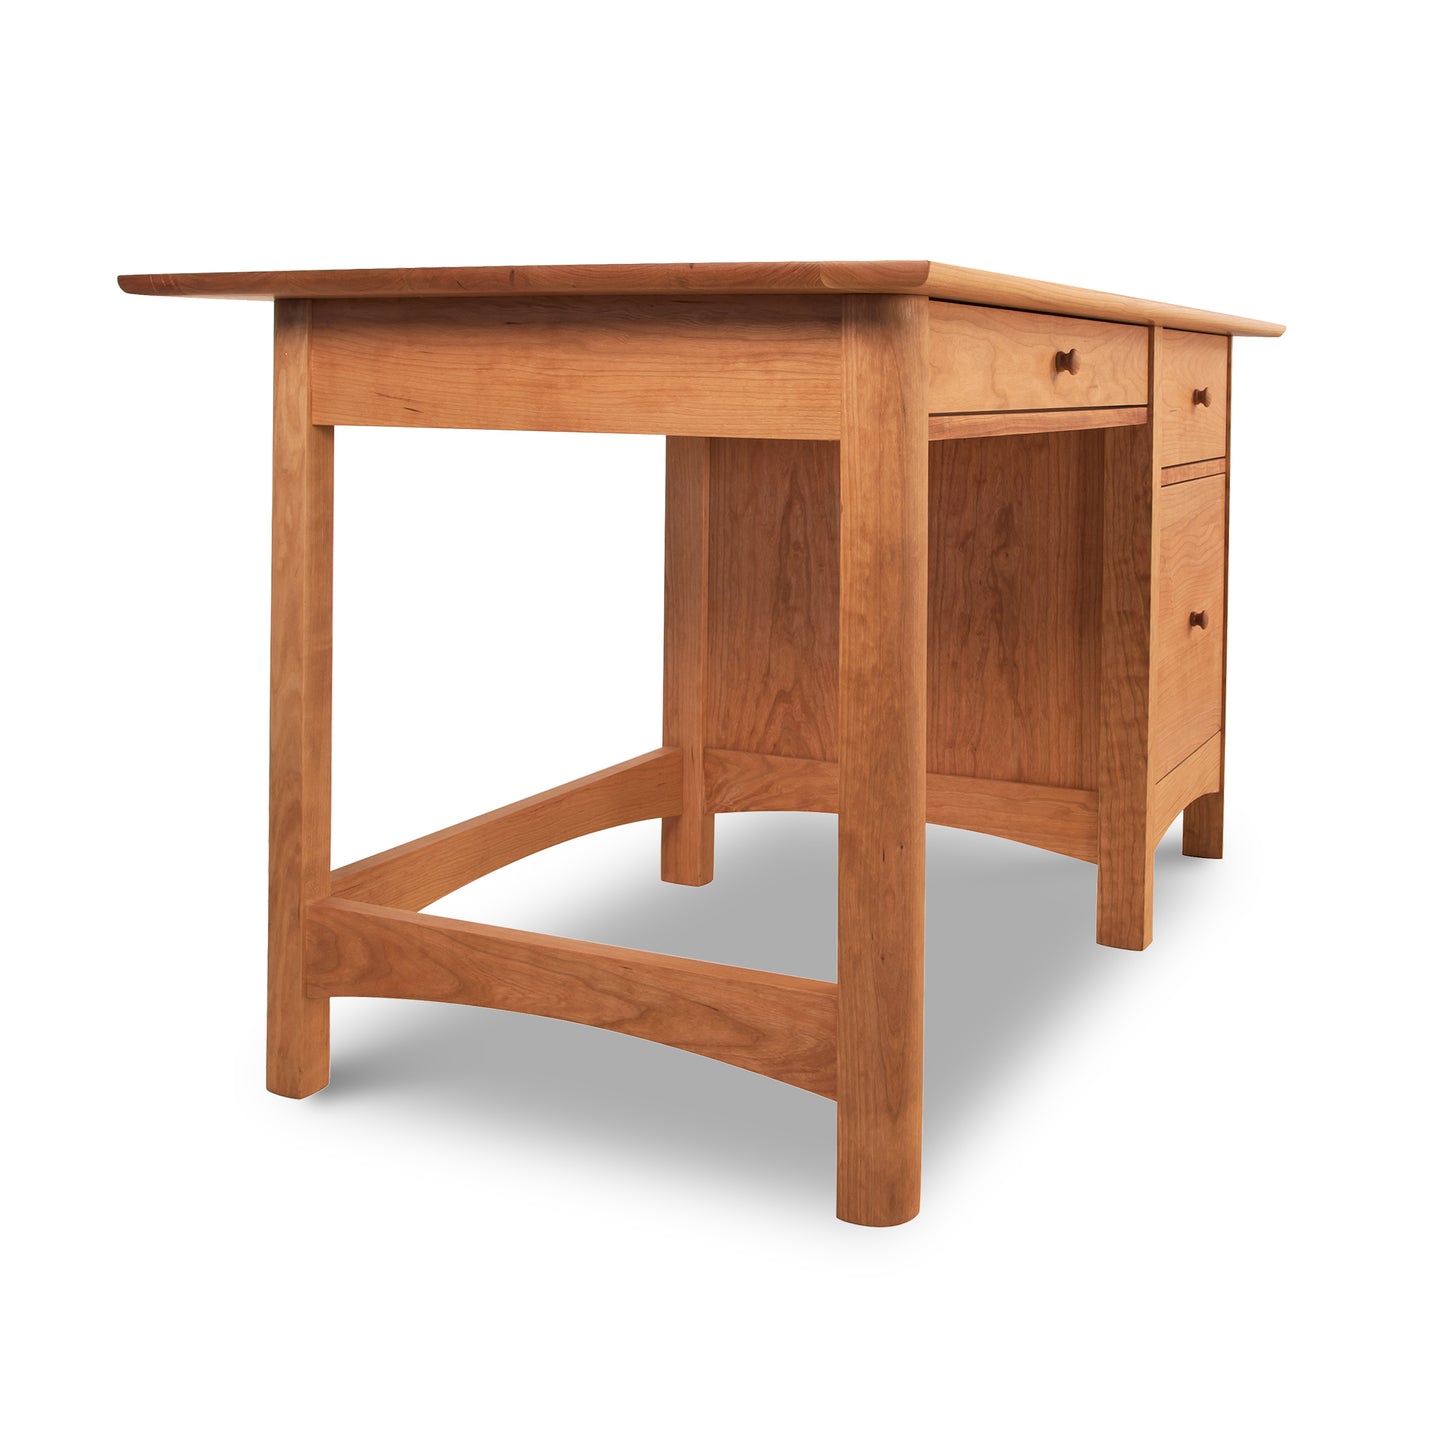 Vermont Furniture Designs Heartwood Shaker Study Desk with a single pedestal of drawers on the right side, featuring a flat top and sturdy construction, isolated on a white background.